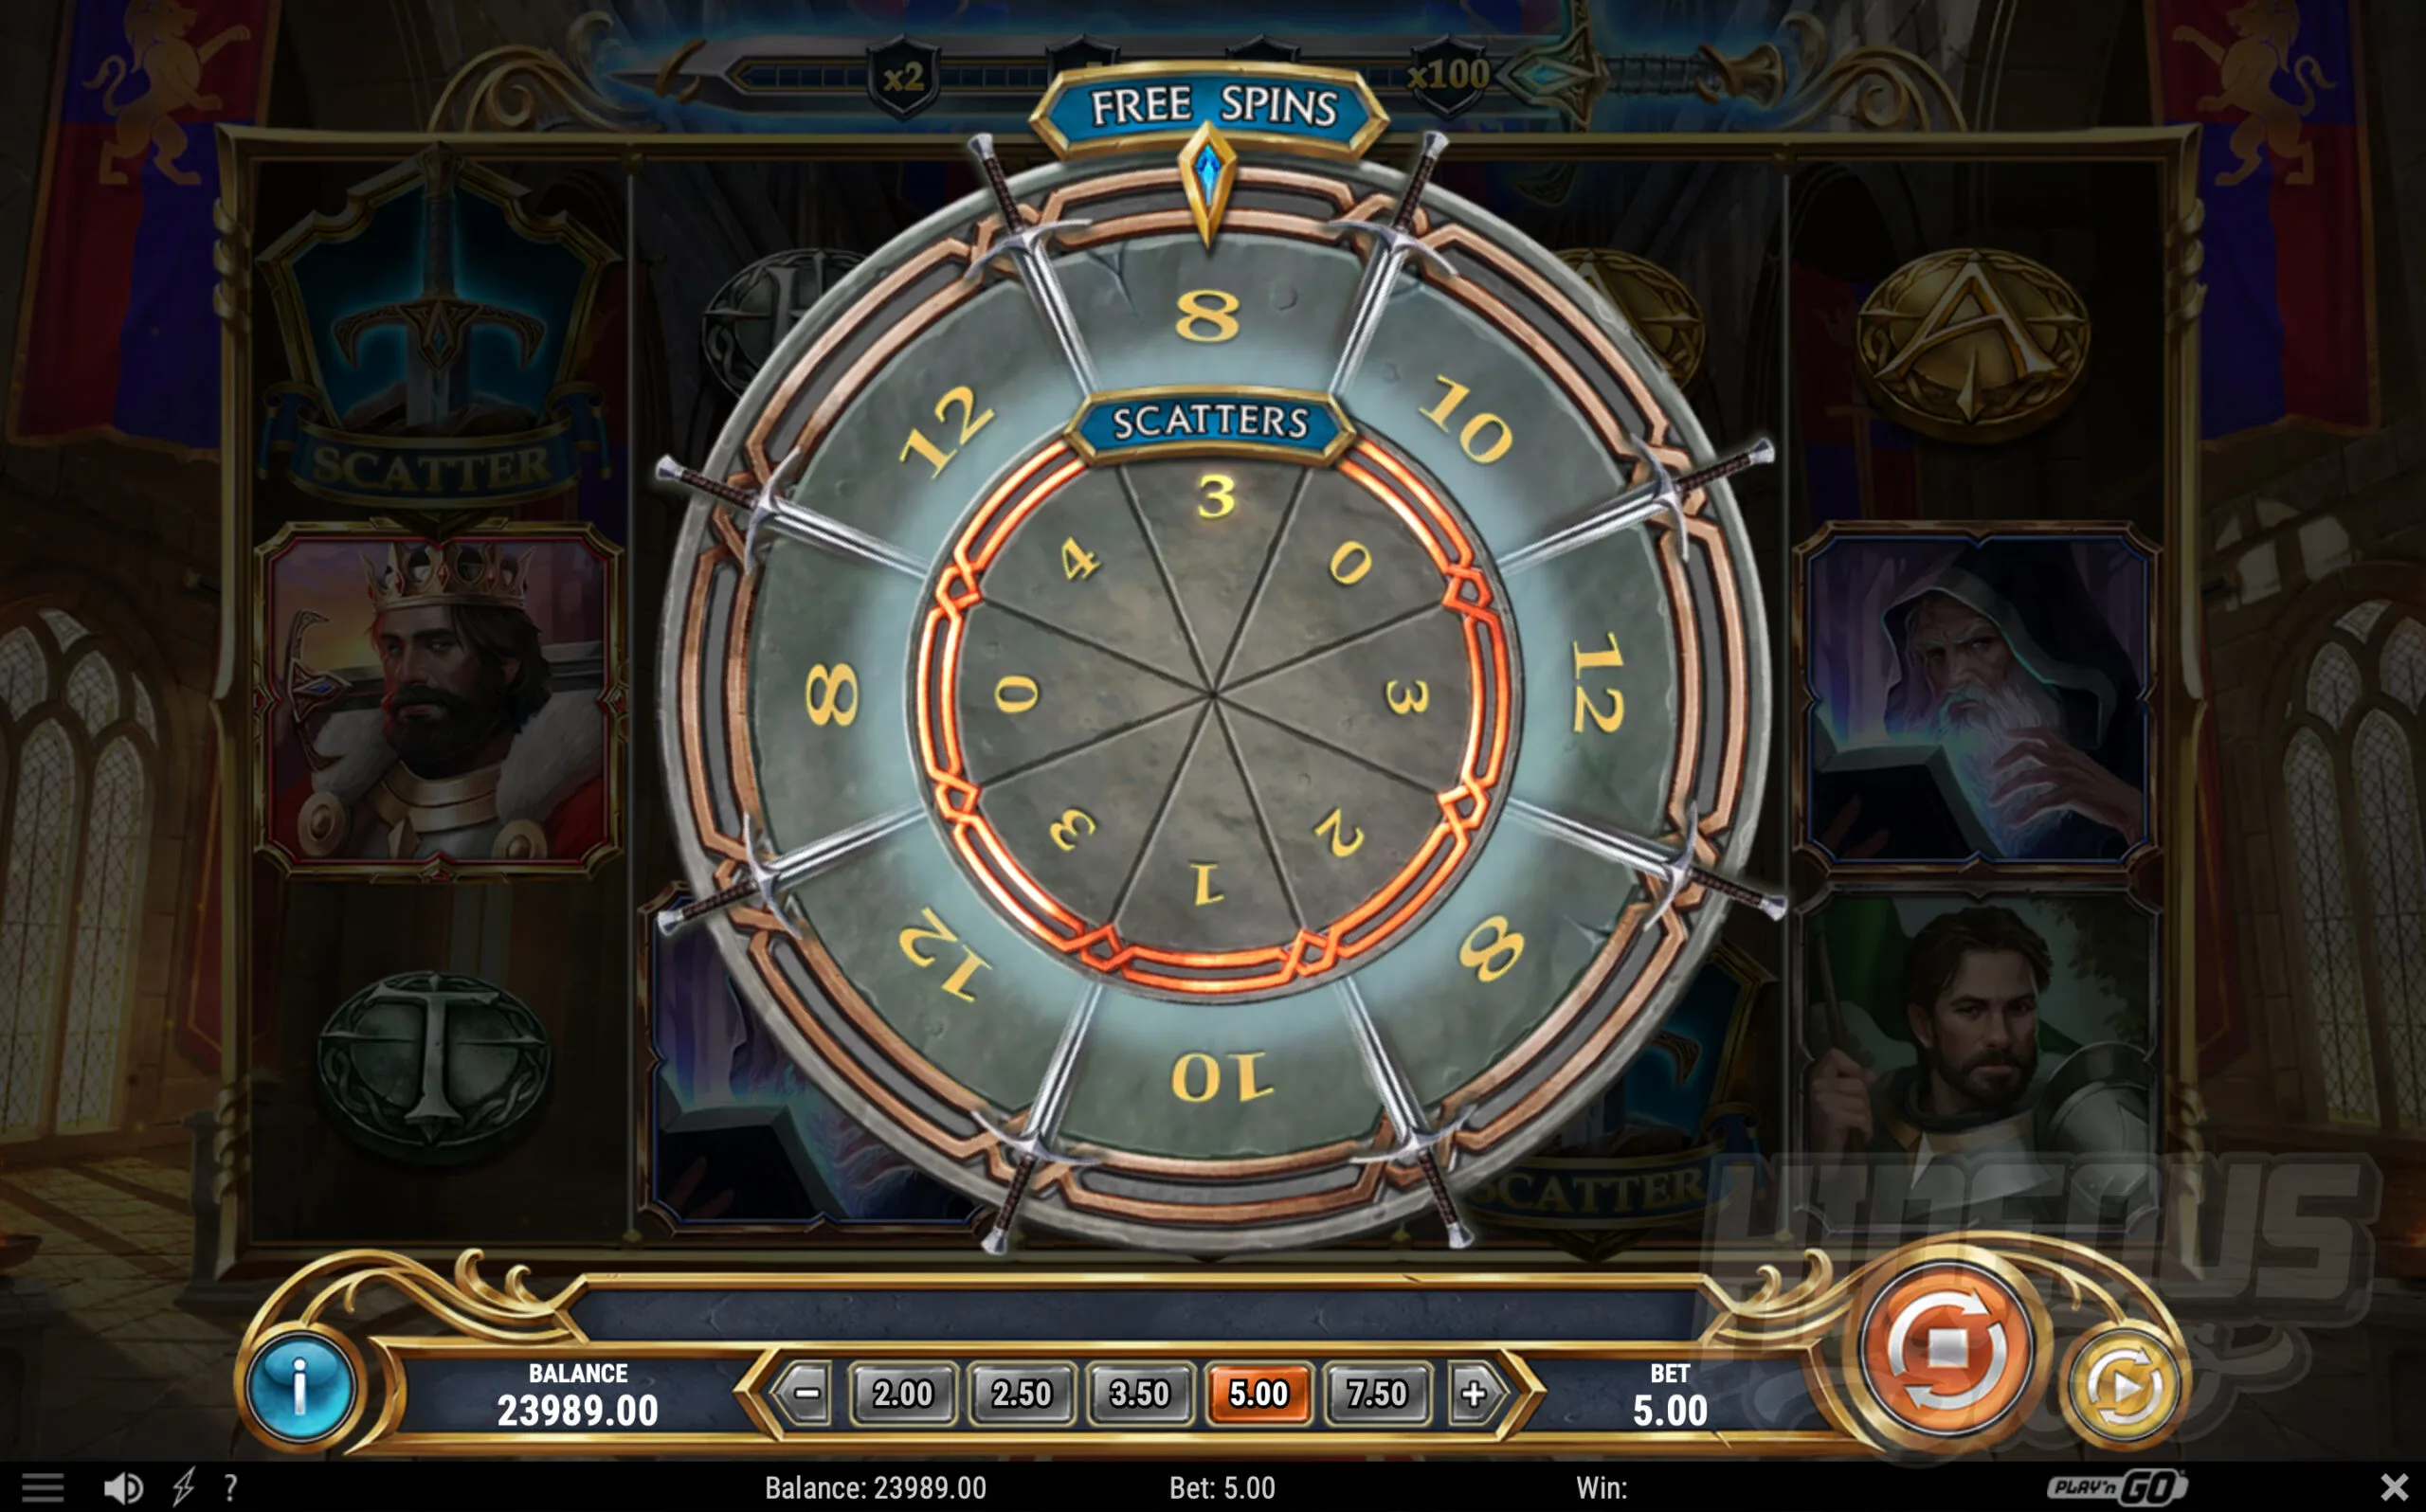 The Round Table Wheel Will Determine the Initial Free Spins and Sword Scatters